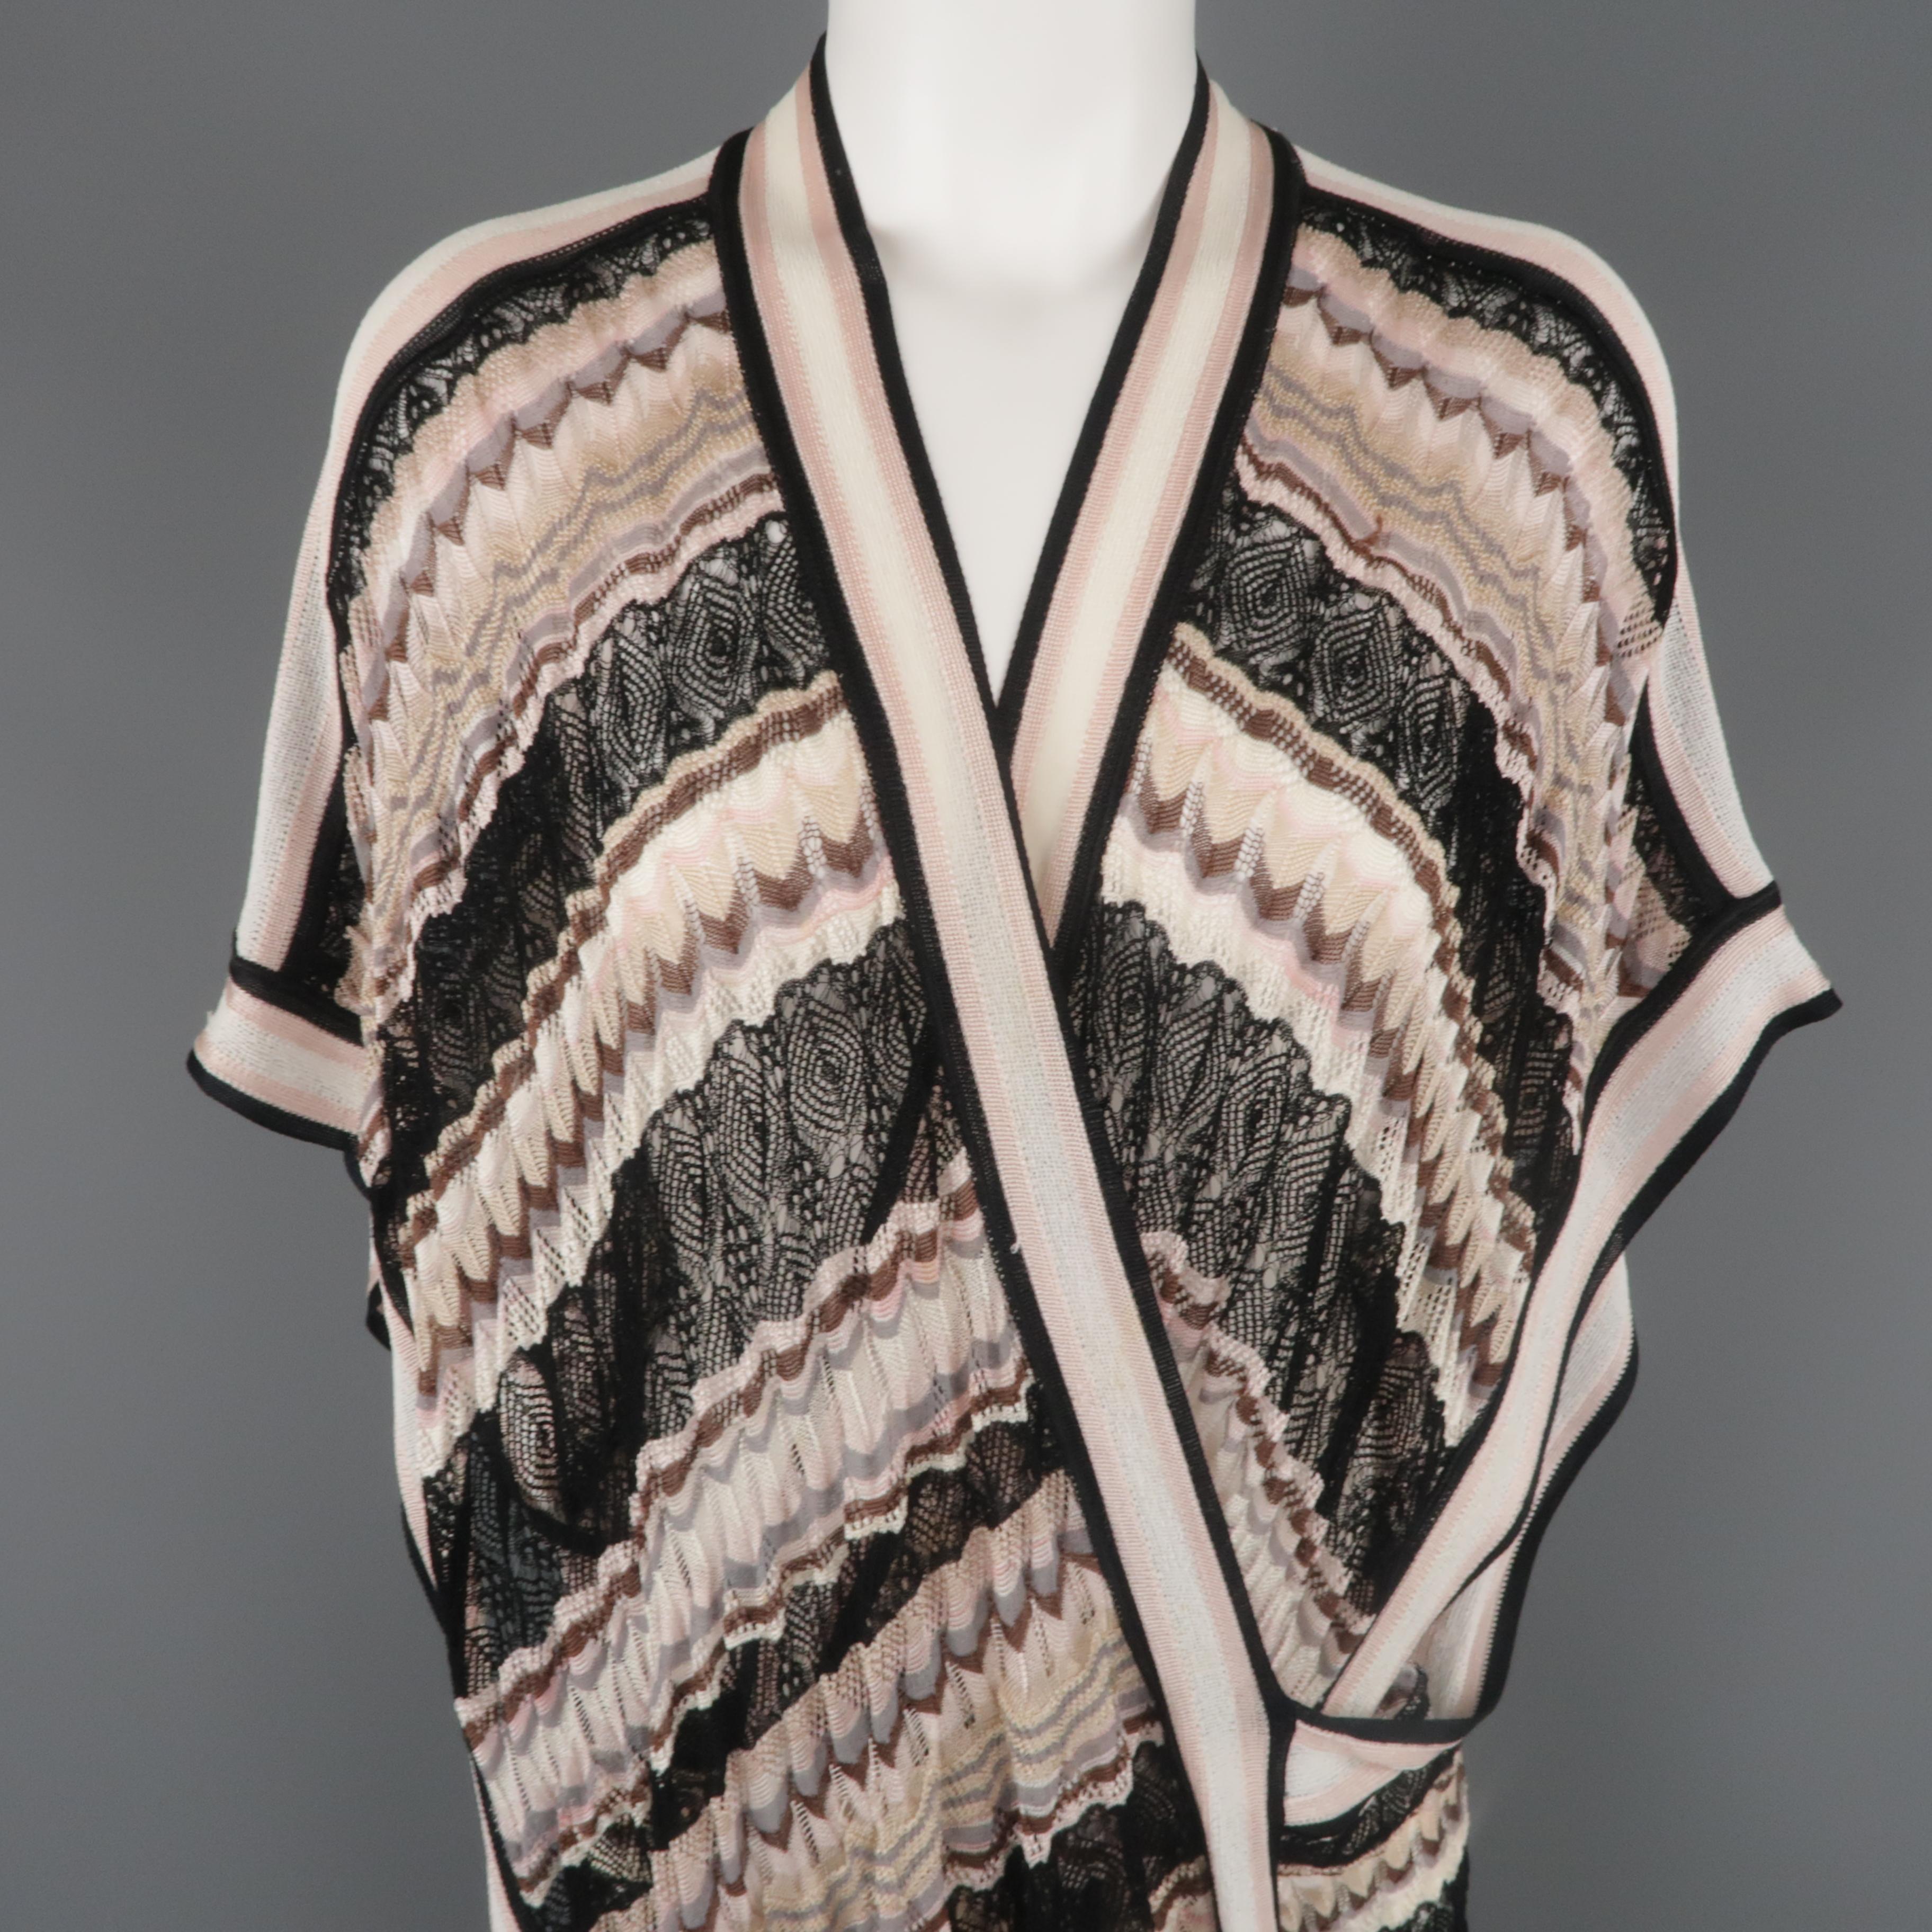 MISSONI sweater comes in light pink, taupe, cream, and black lace mesh textured silk blend knit with a deep V neck, wrap construction, open cape sleeves. Made in Italy.
 
Excellent Pre-Owned Condition.
Marked: S
 
Measurements:
 
Shoulder: 32